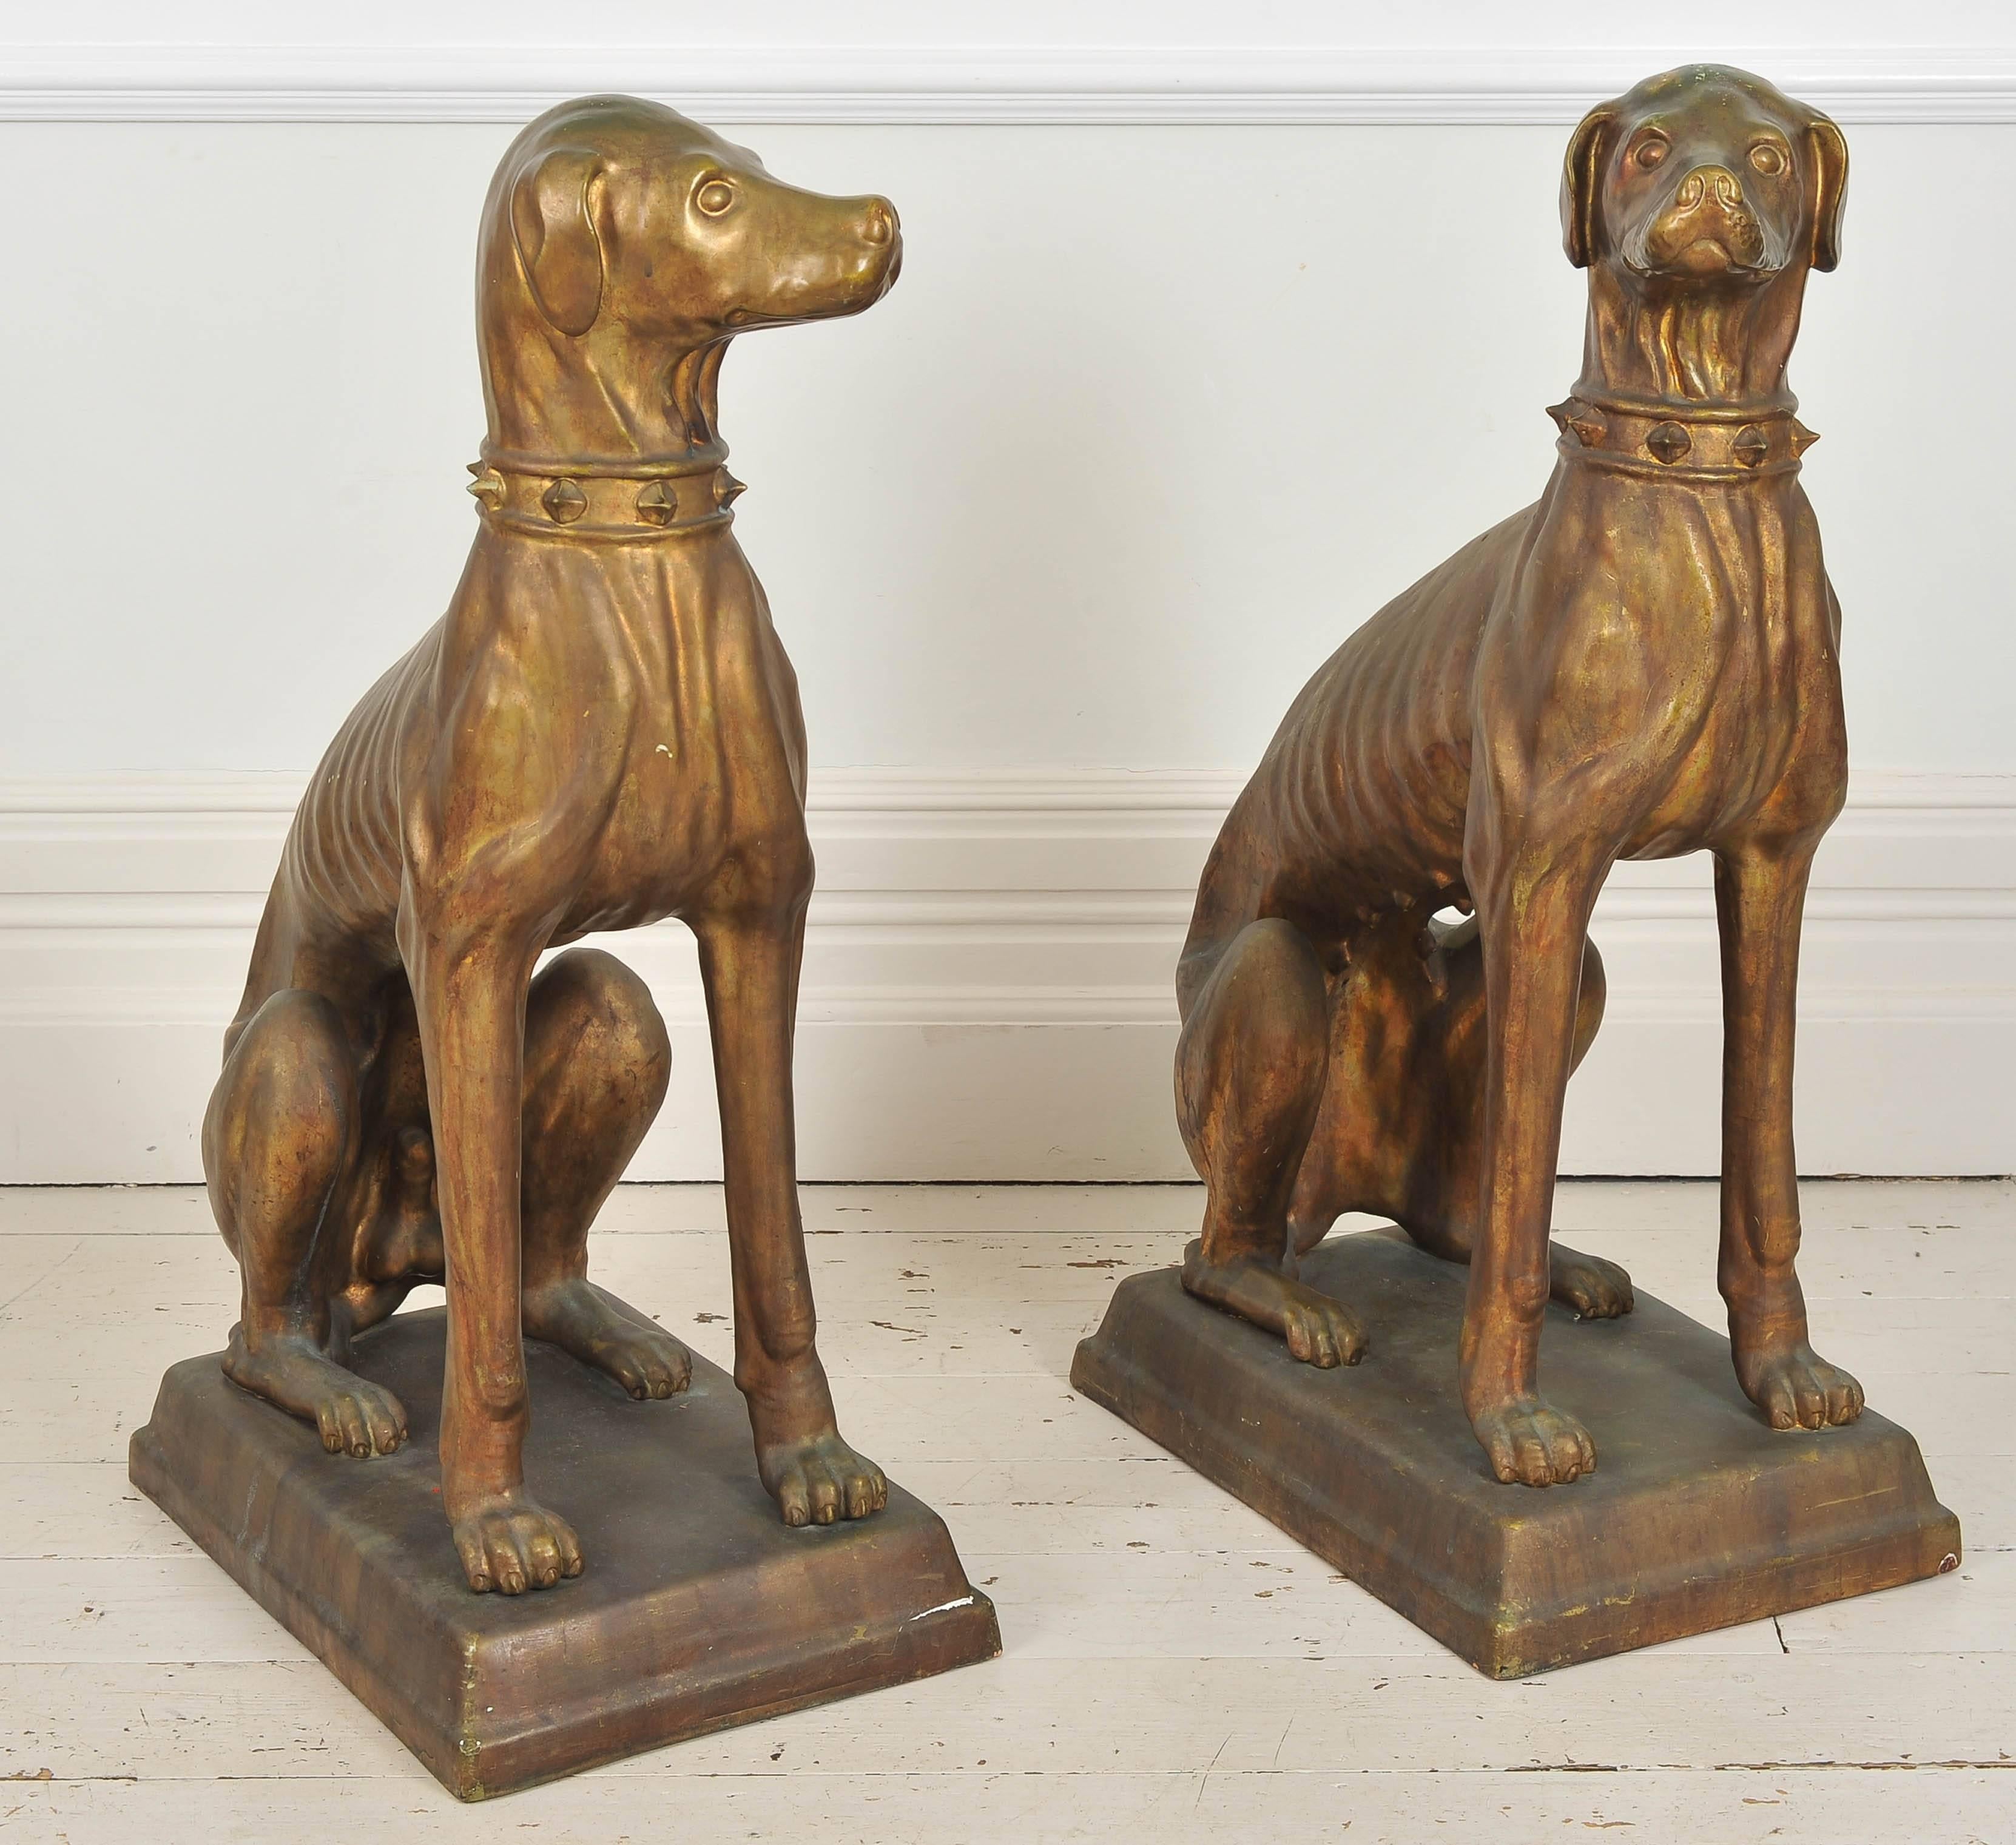 This very grand pair of Italian male and female terracotta dogs is unlike anything we've seen before. They are glazed with a wonderful golden bronze colour which gives them a luminous quality. The stature and scale of these dogs together with the